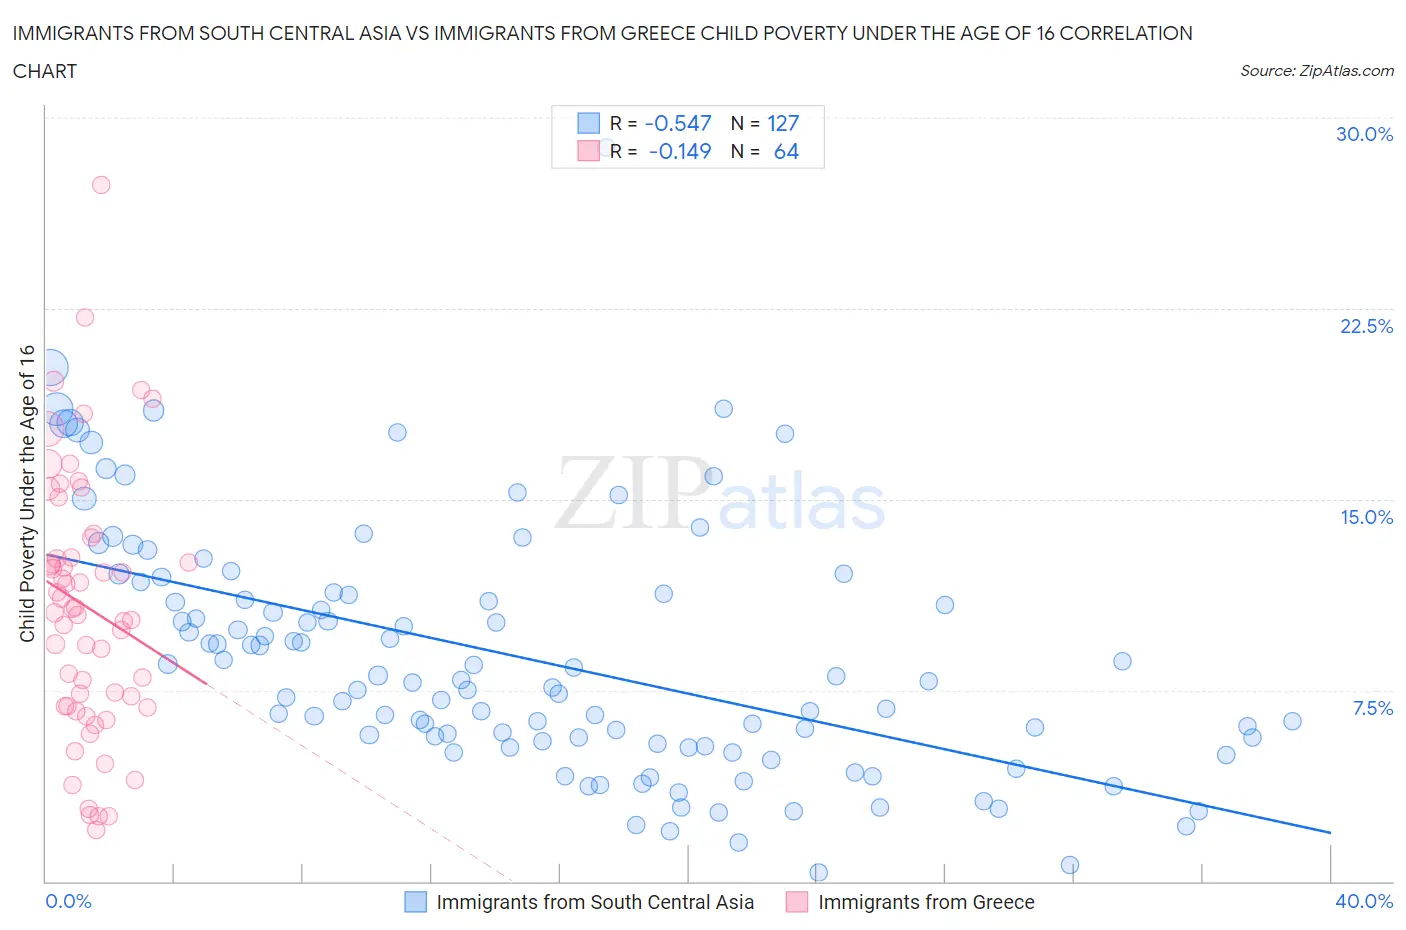 Immigrants from South Central Asia vs Immigrants from Greece Child Poverty Under the Age of 16